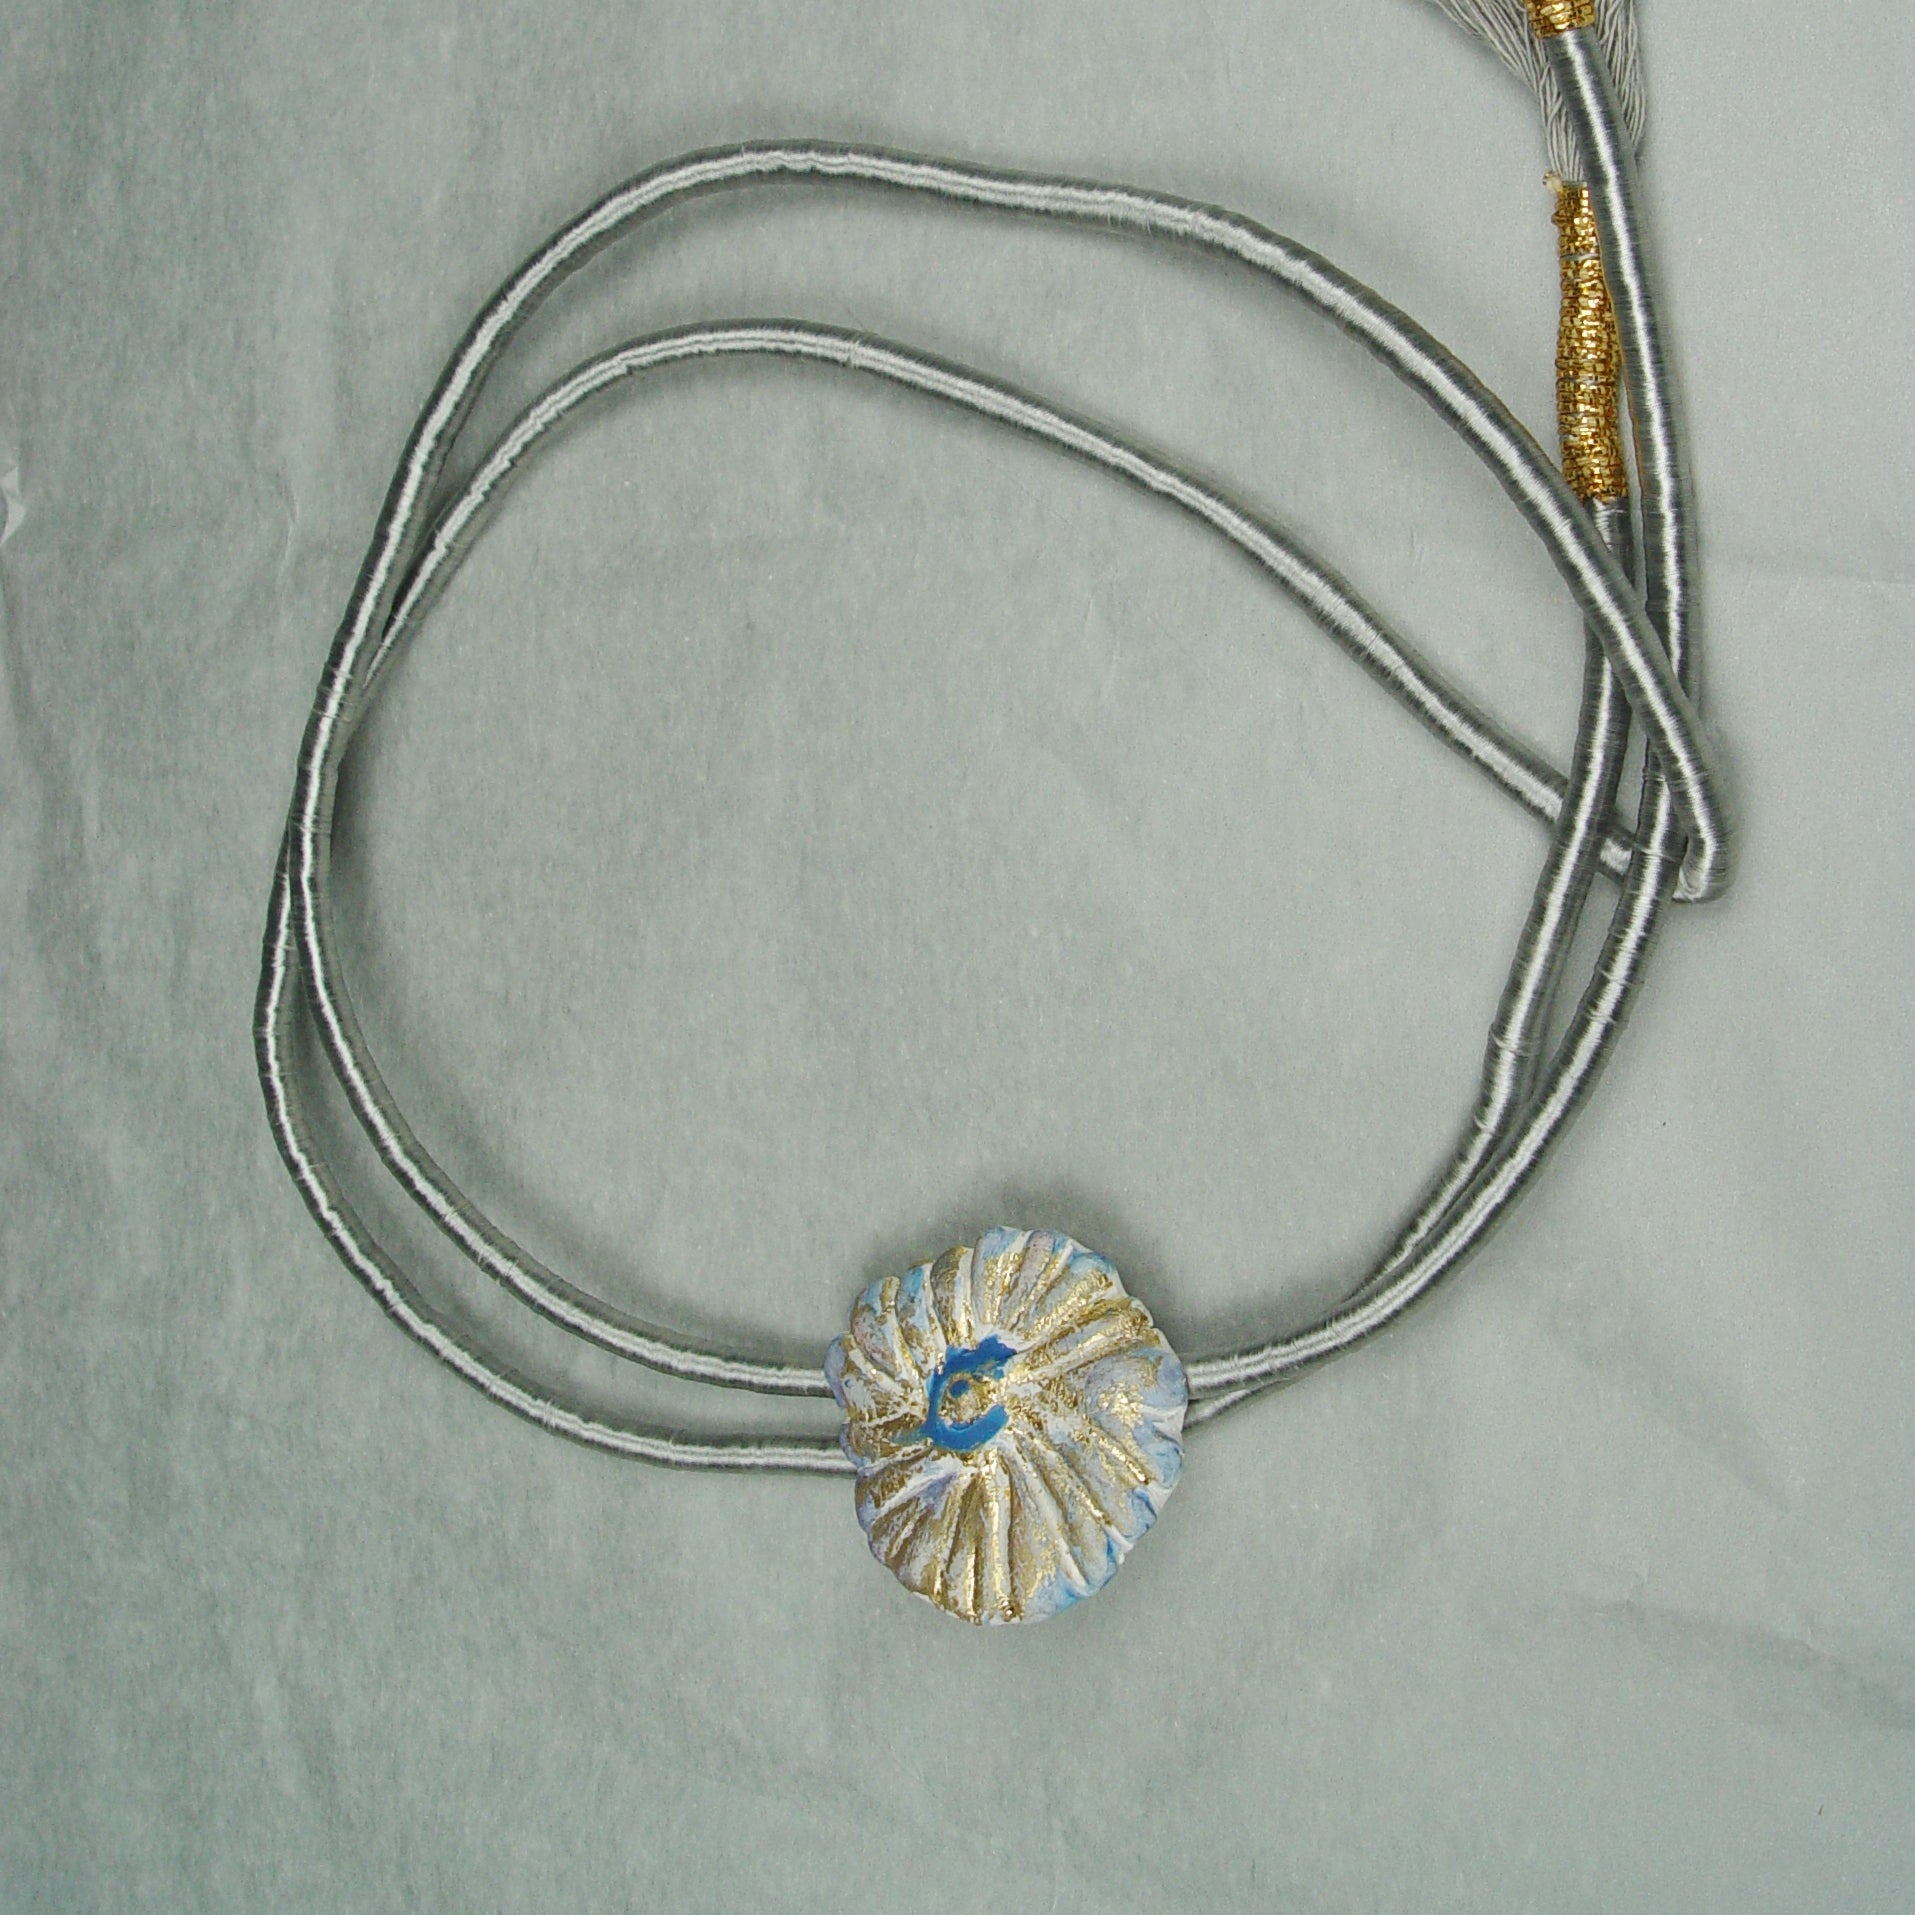 Thetis gilded flower necklace